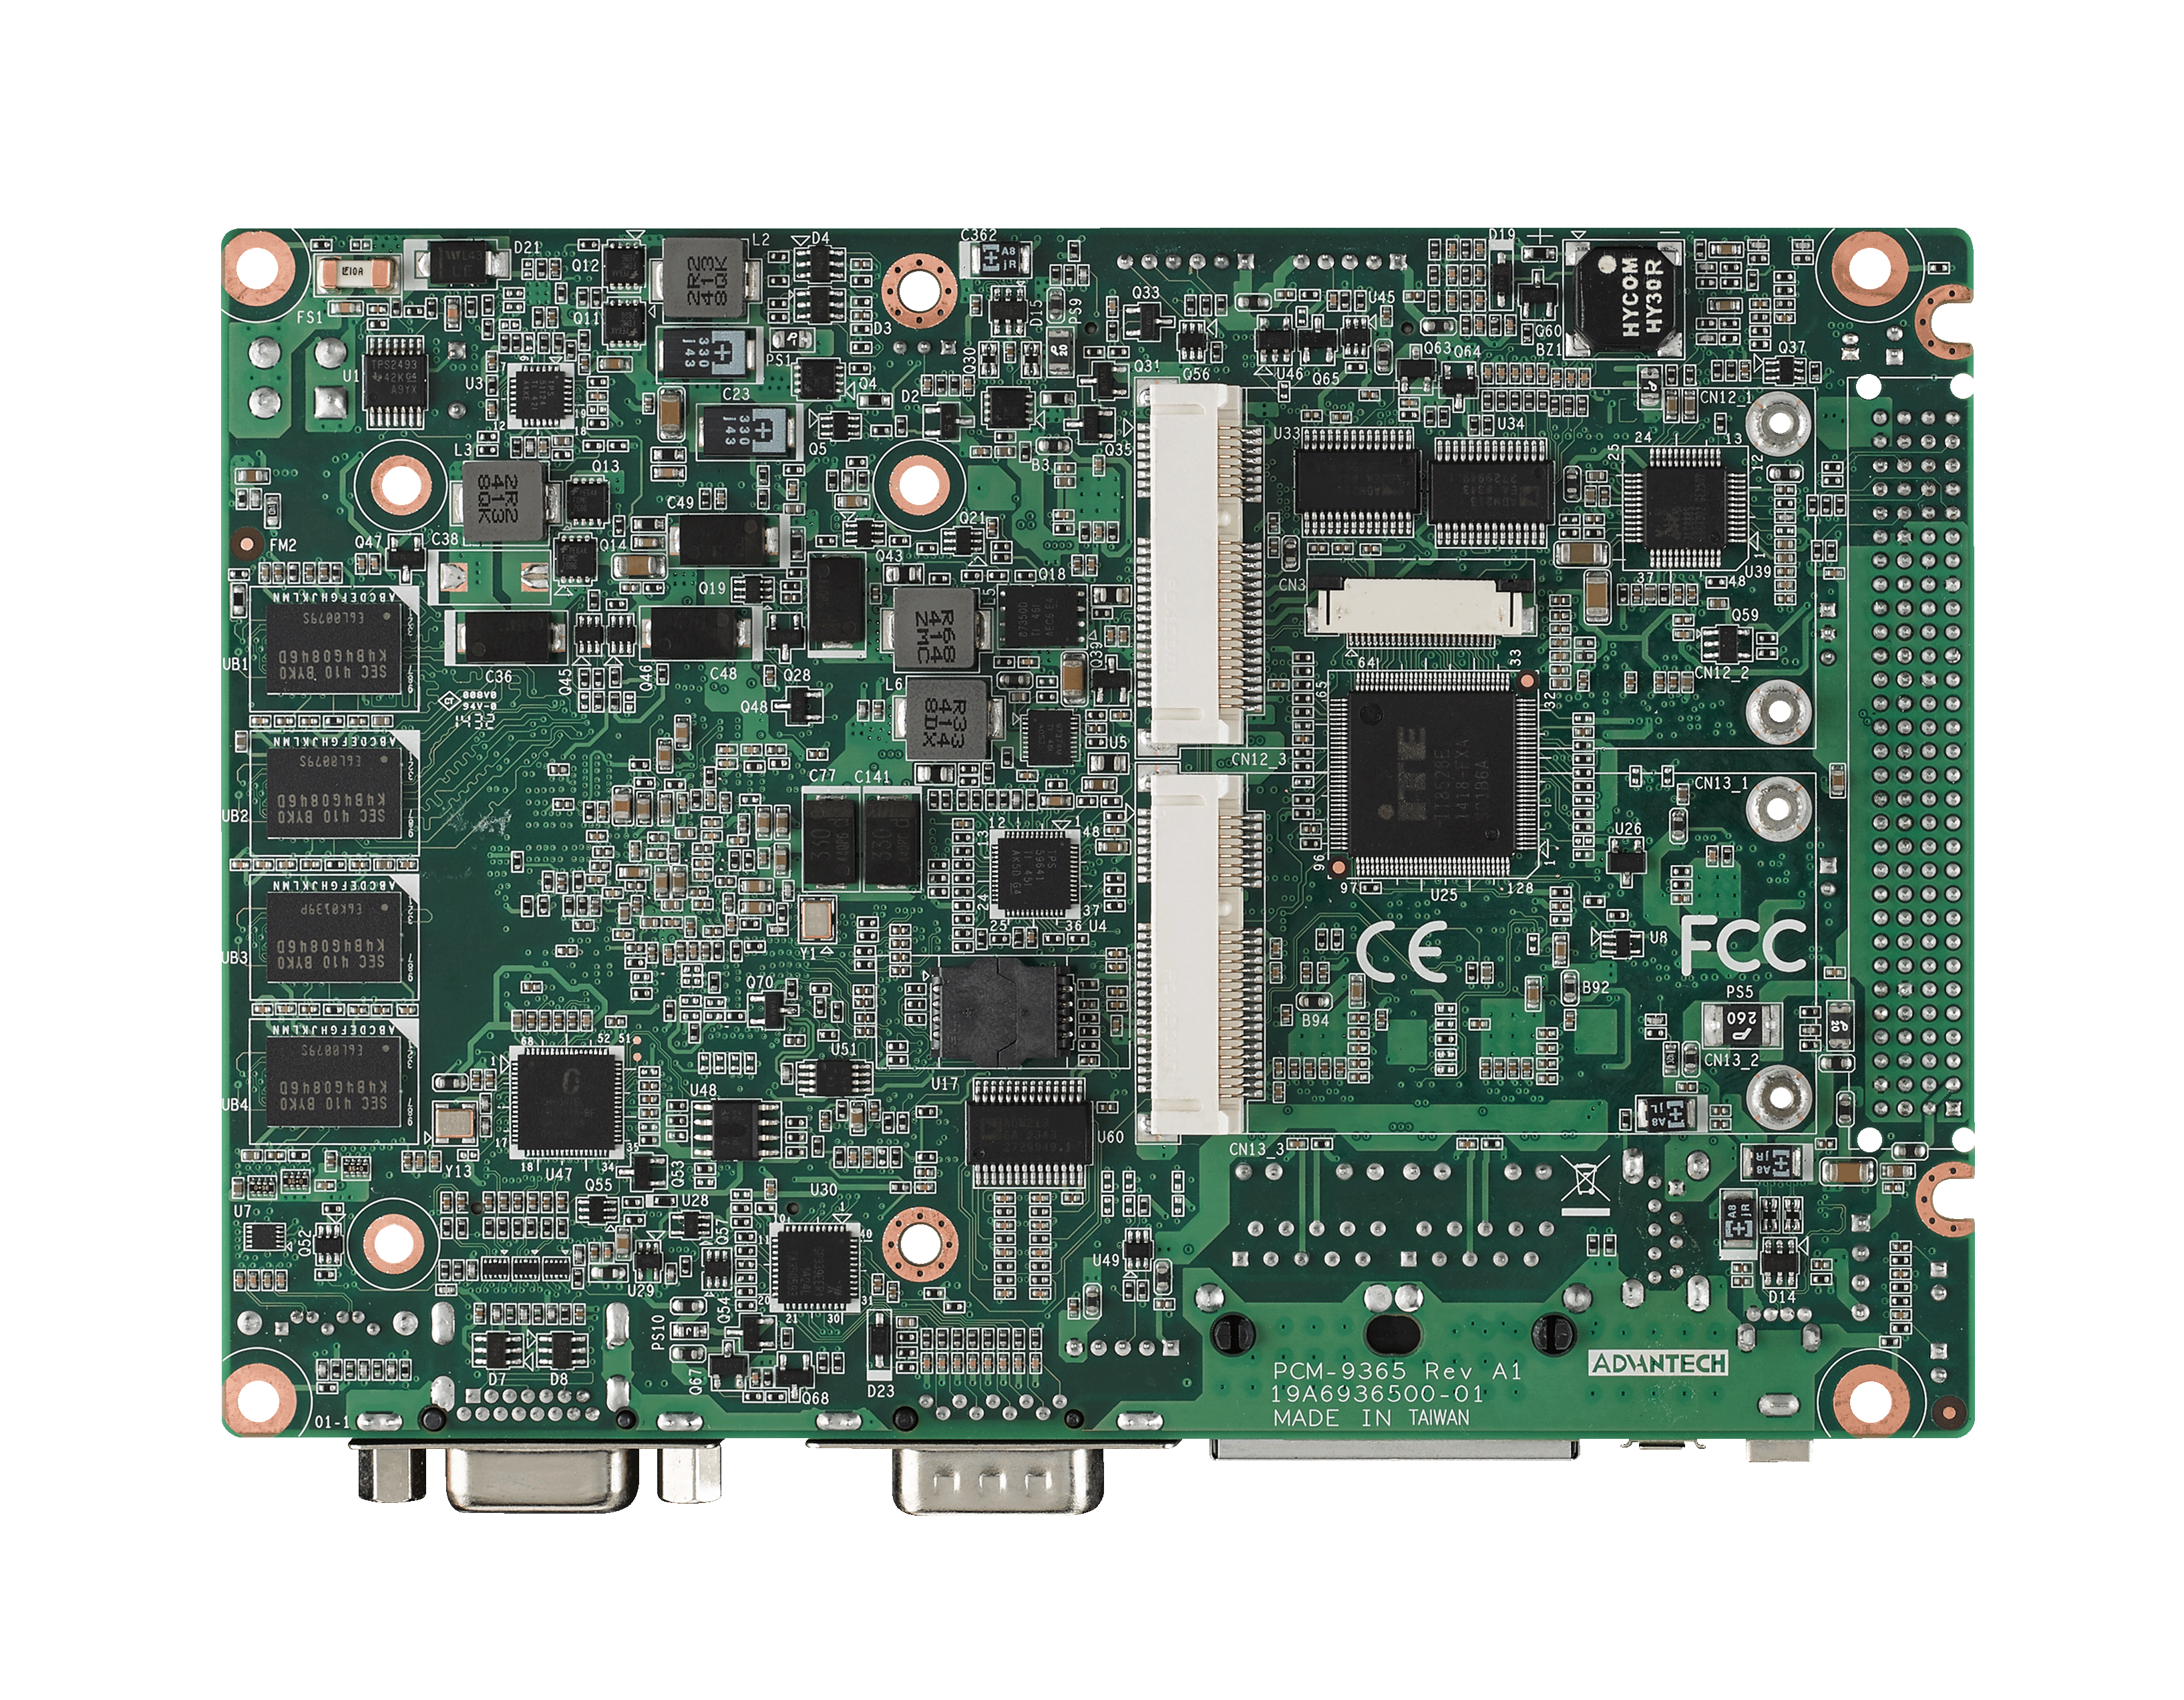 3.5” Embedded Single Board Computer Intel<sup>®</sup> Atom E3825, PCI-104 2G RAM/VGA+LVDS , Wide Temp Support (-40 ~ 85° C)